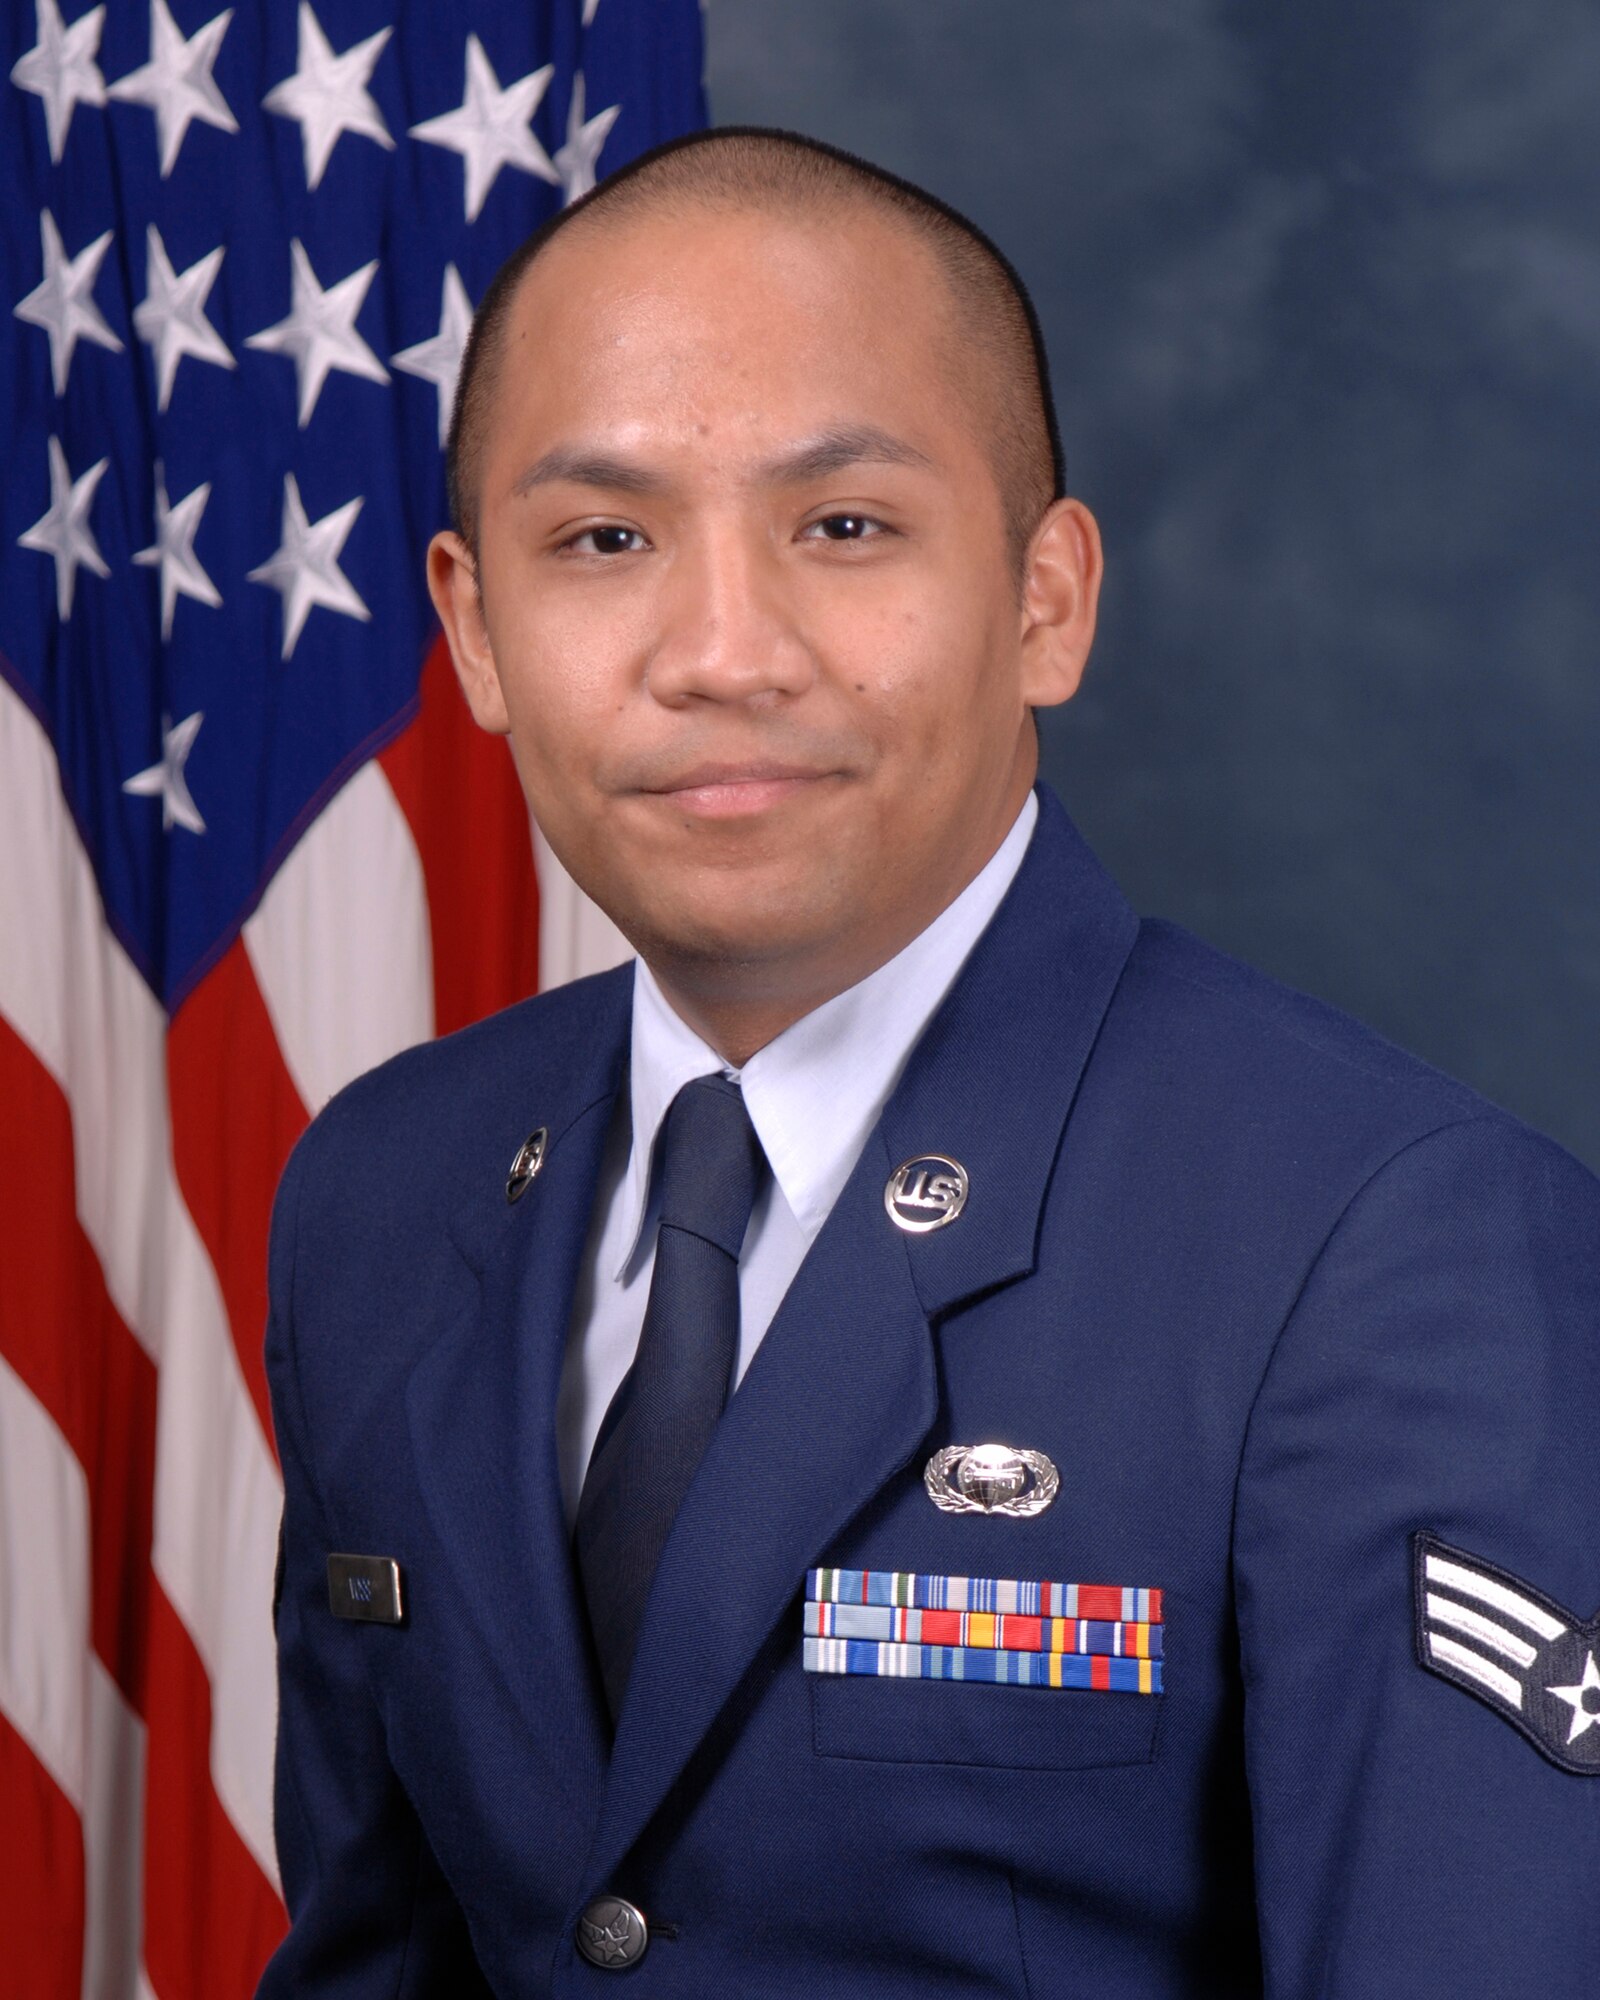 OFFUTT AIR FORCE BASE, Neb. -- Senior Airman Rojelio Y. Voss, from Tyndall AFB, Fla., is one of 29 Airmen nominated for awards who will attend the 2010 Air Combat Command Outstanding Airmen of the Year Awards Banquet in Omaha, Neb., April 21. Airman Voss is nominated for the Airman of the Year Award. U.S. Air Force courtesy photo 